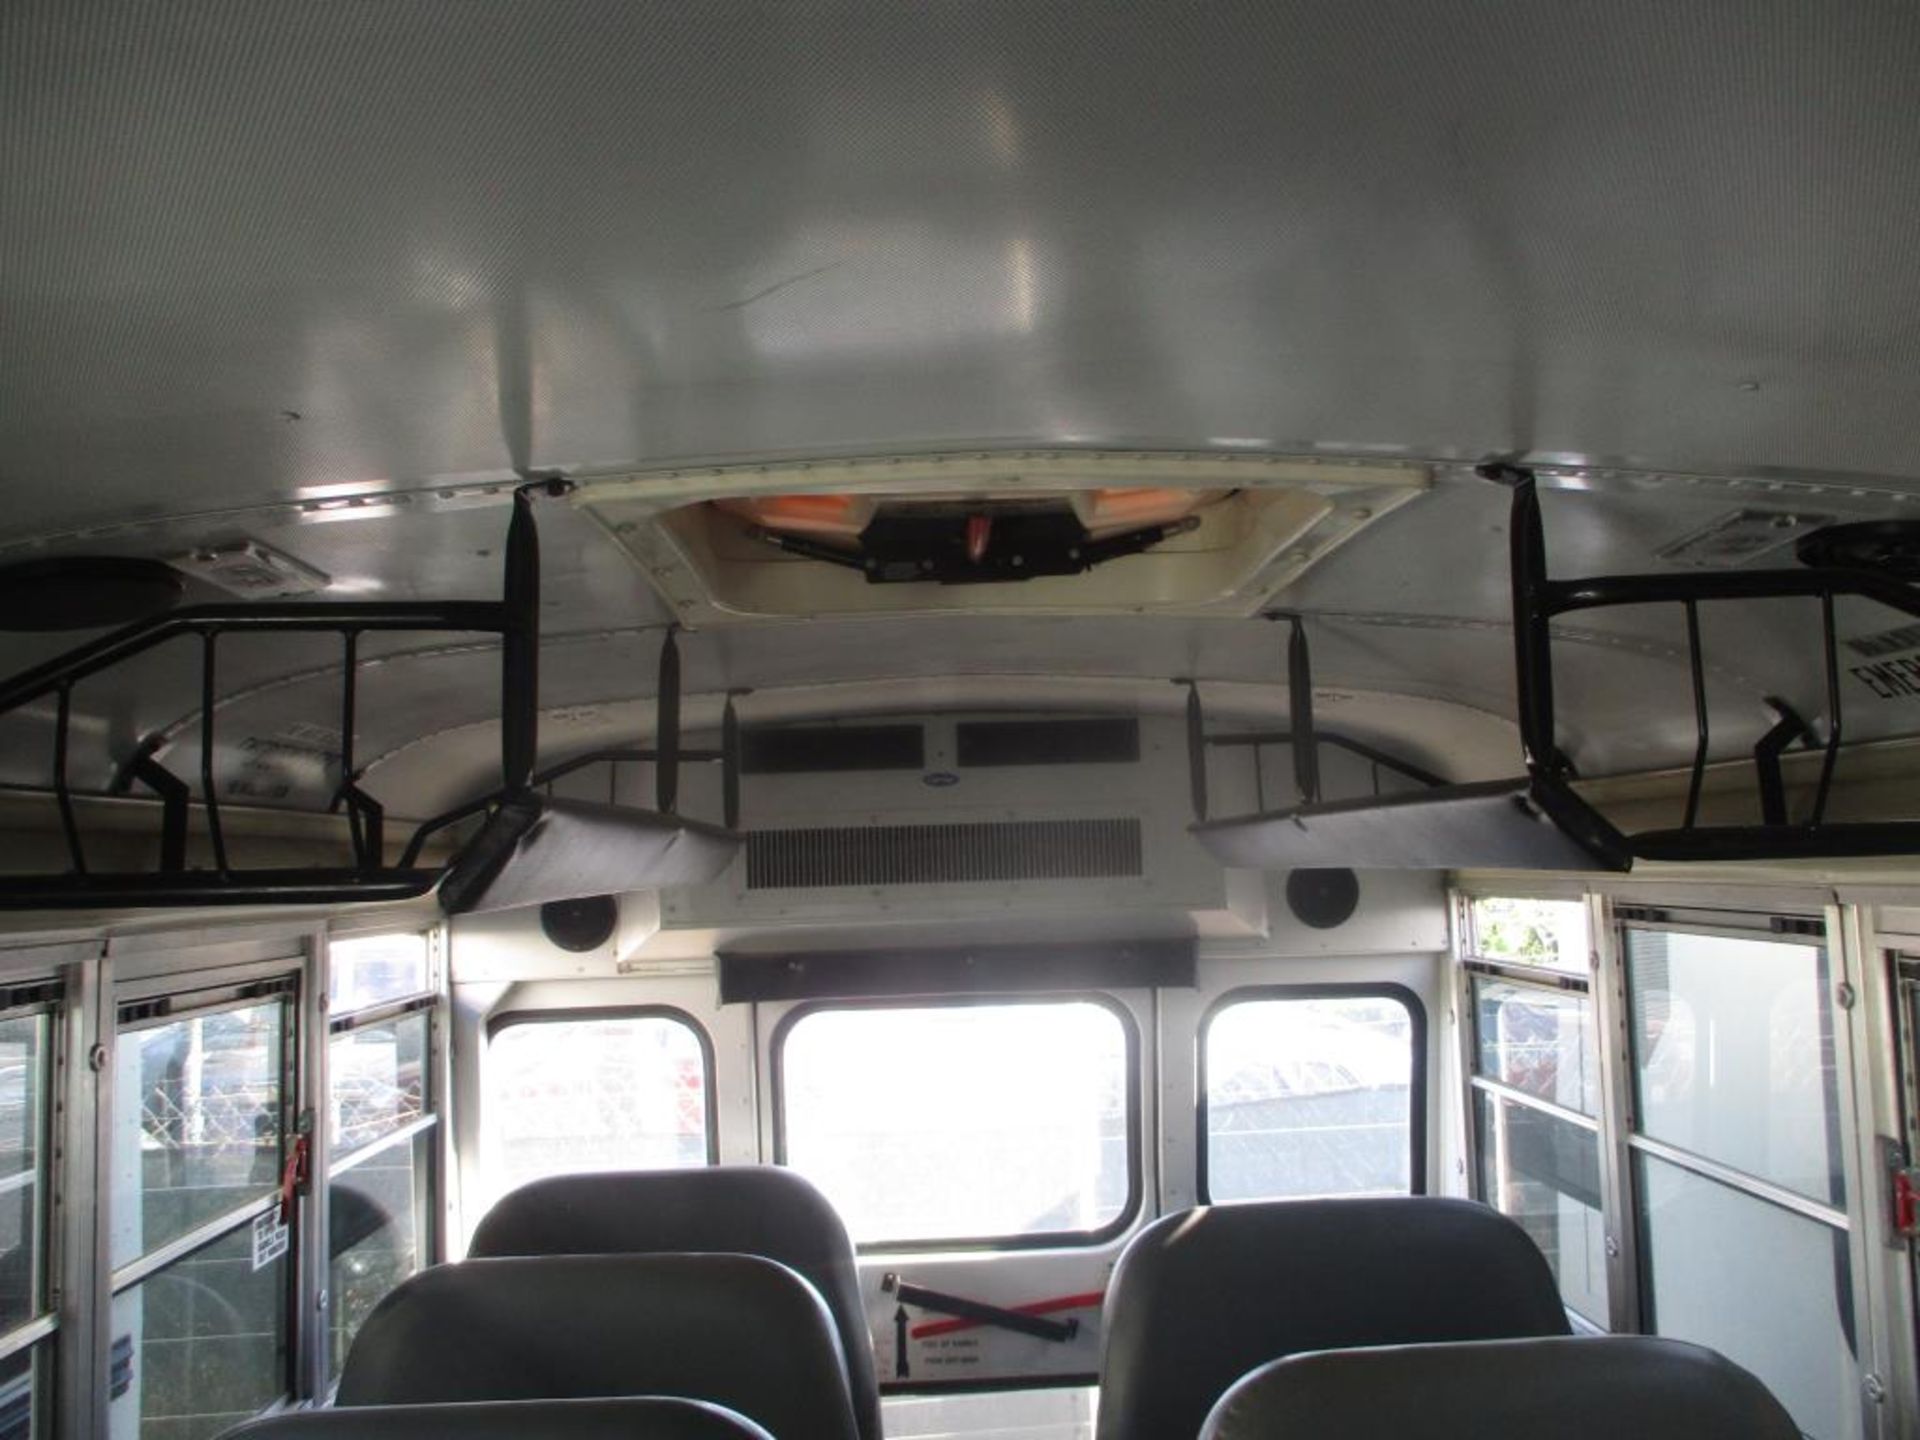 (Lot # 3920) - 2008 Ford E-Series School Bus - Image 10 of 13